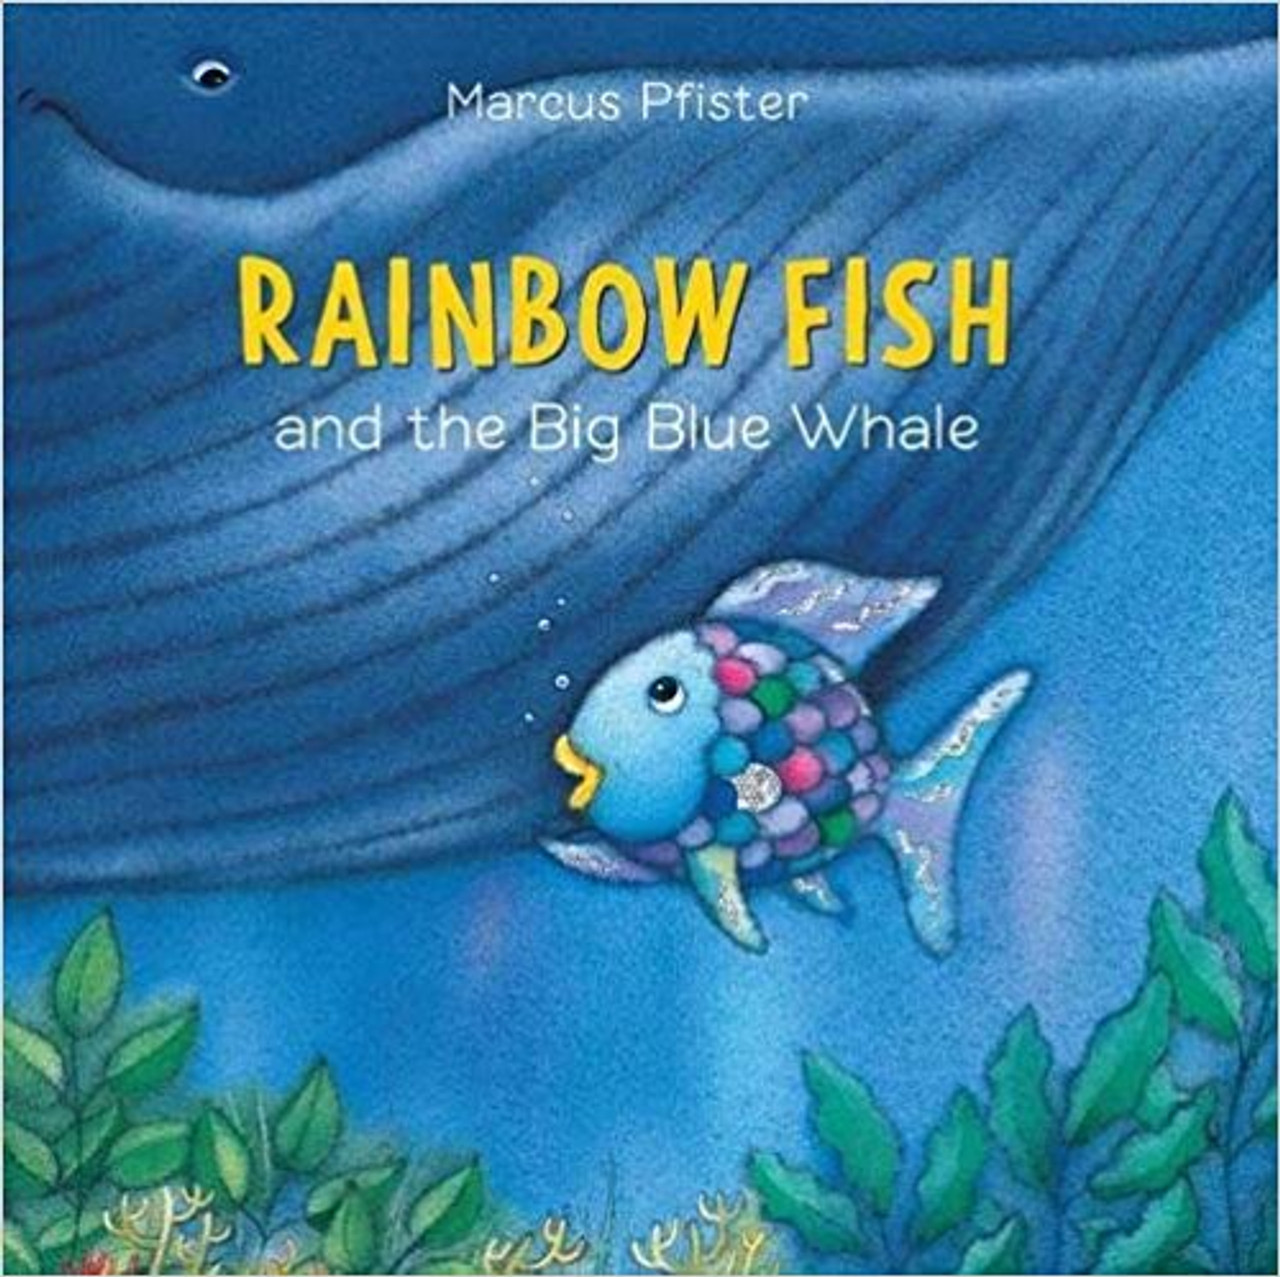 It's a whale of a tale in which a terrible misunderstanding escalates, putting Rainbow Fish and his friends in great danger, and Rainbow Fish must try to make peace with a big blue whale to save them all from disaster.  When a big blue whale comes to live near their reef, there is a misunderstanding between him and Rainbow Fish and his friends that leave everyone very unhappy and hungry.